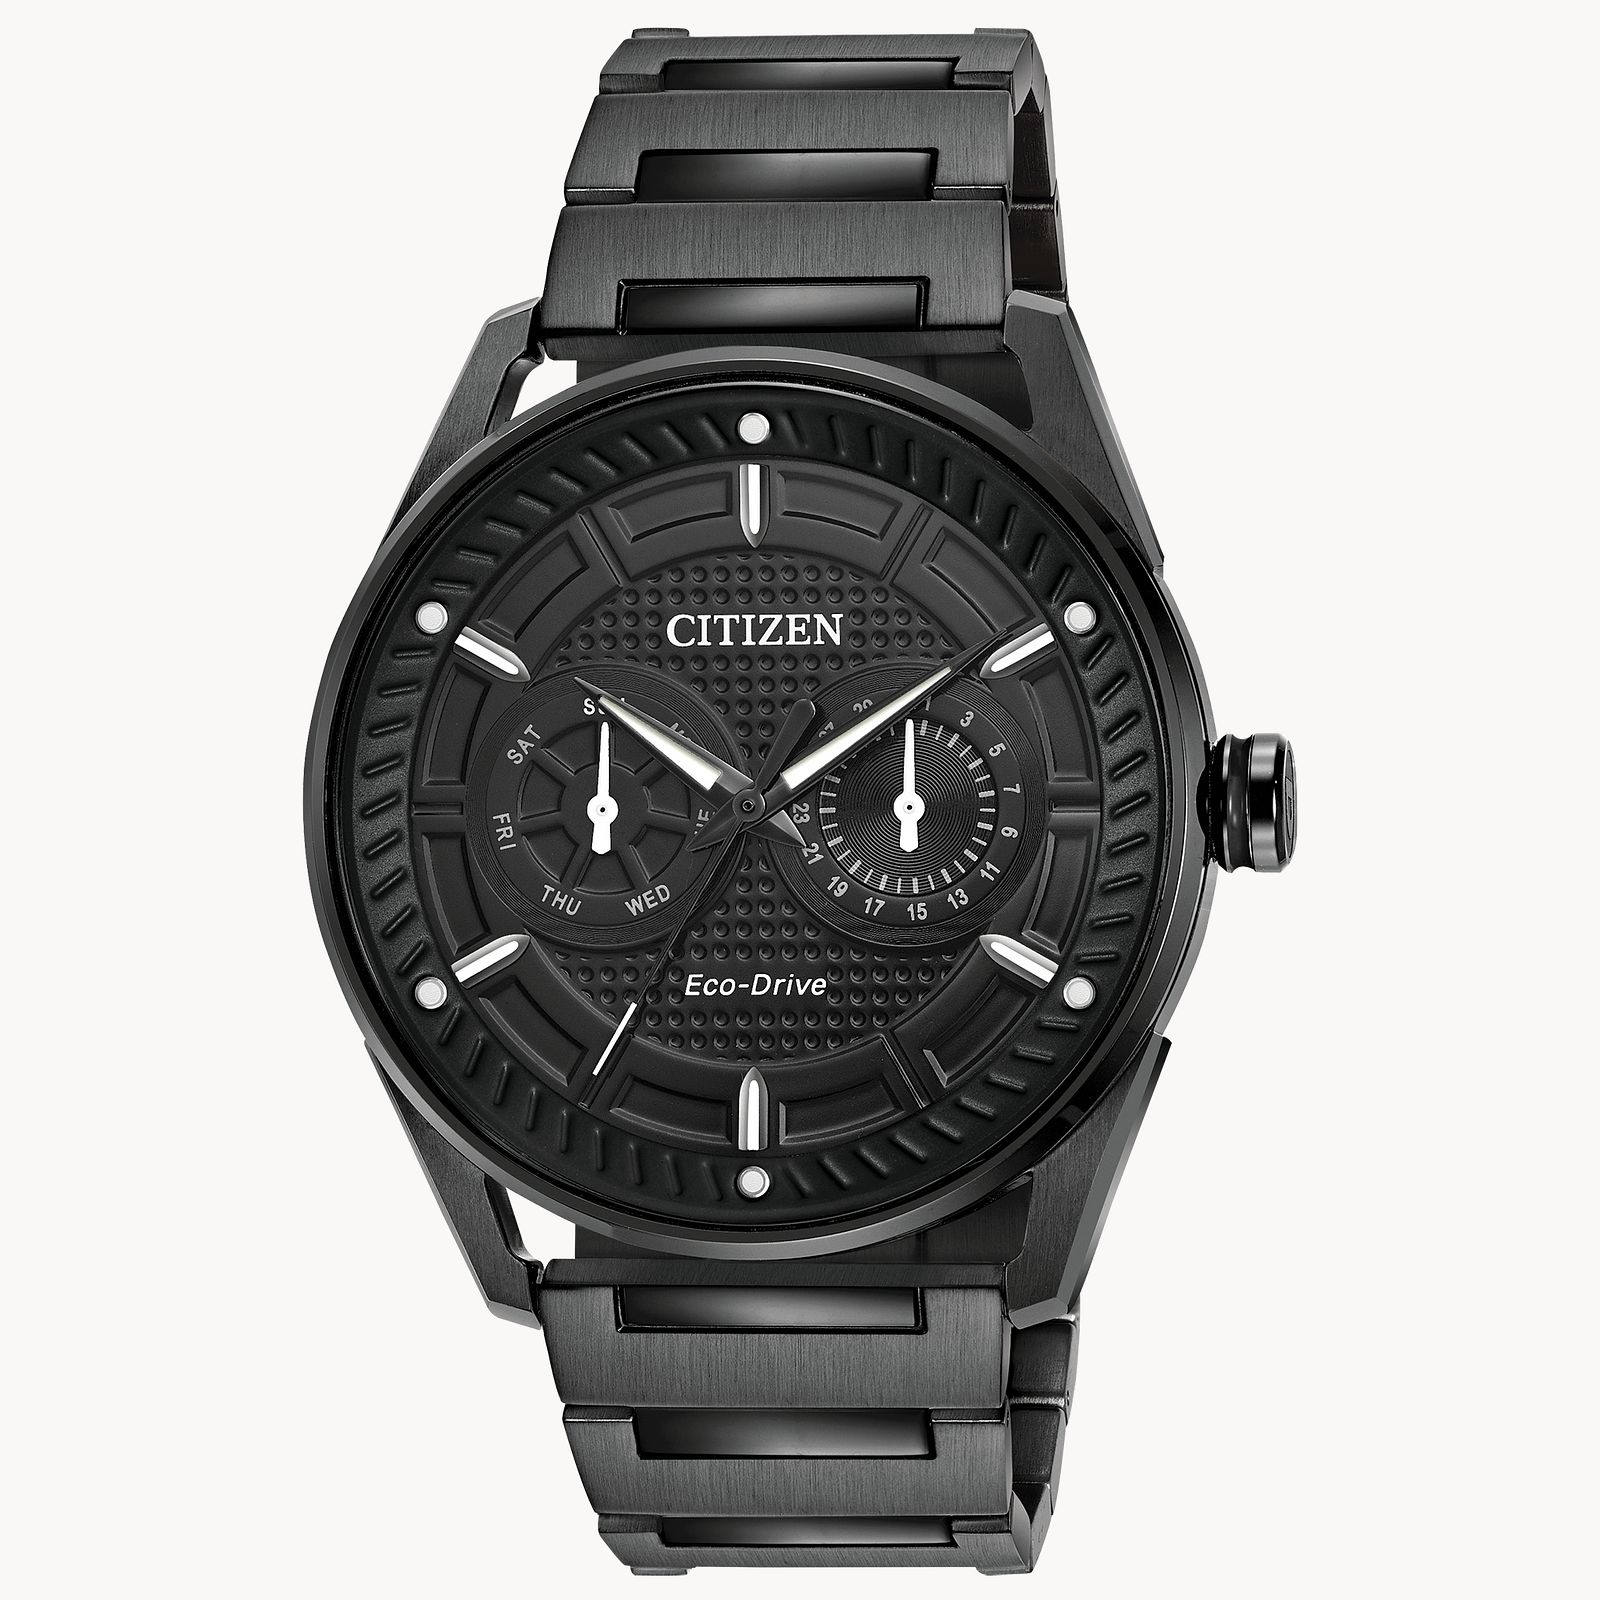 CITIZEN Eco Drive Black Dial Stainless Steel Men's Watch BL6067-54E, Fast  & Free US Shipping